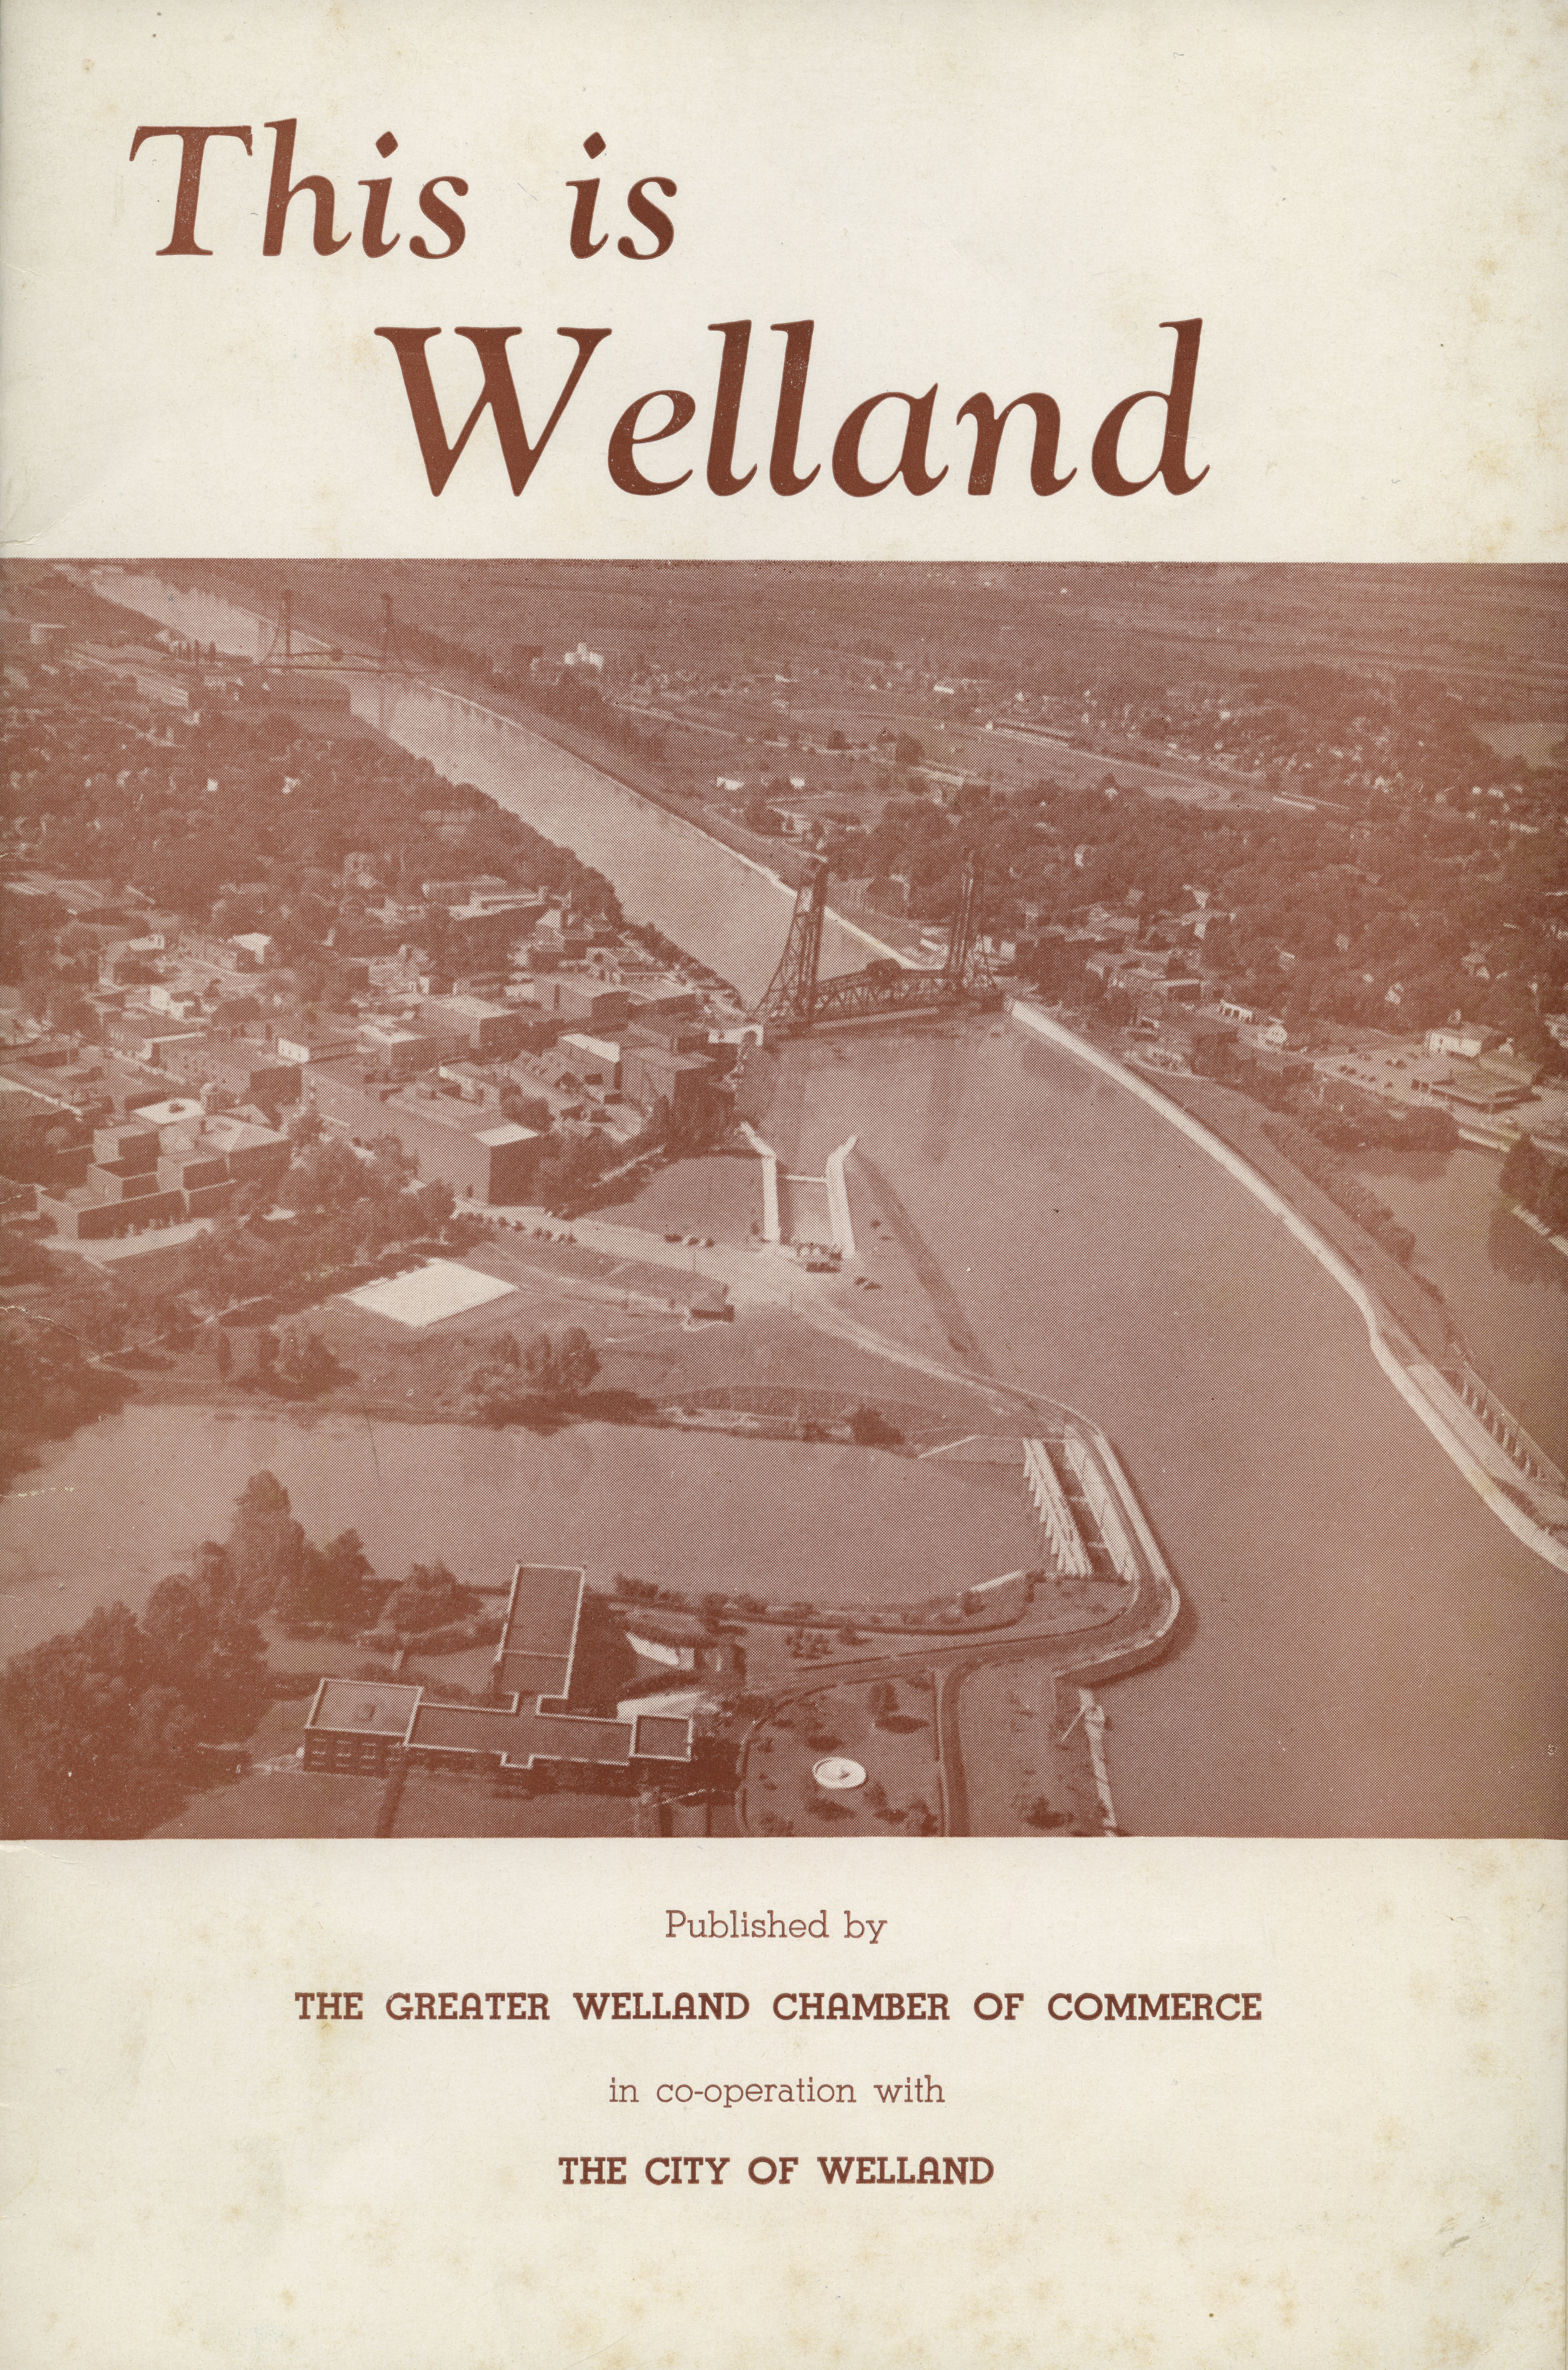 The title page of a brochure, reading "This is Welland". 